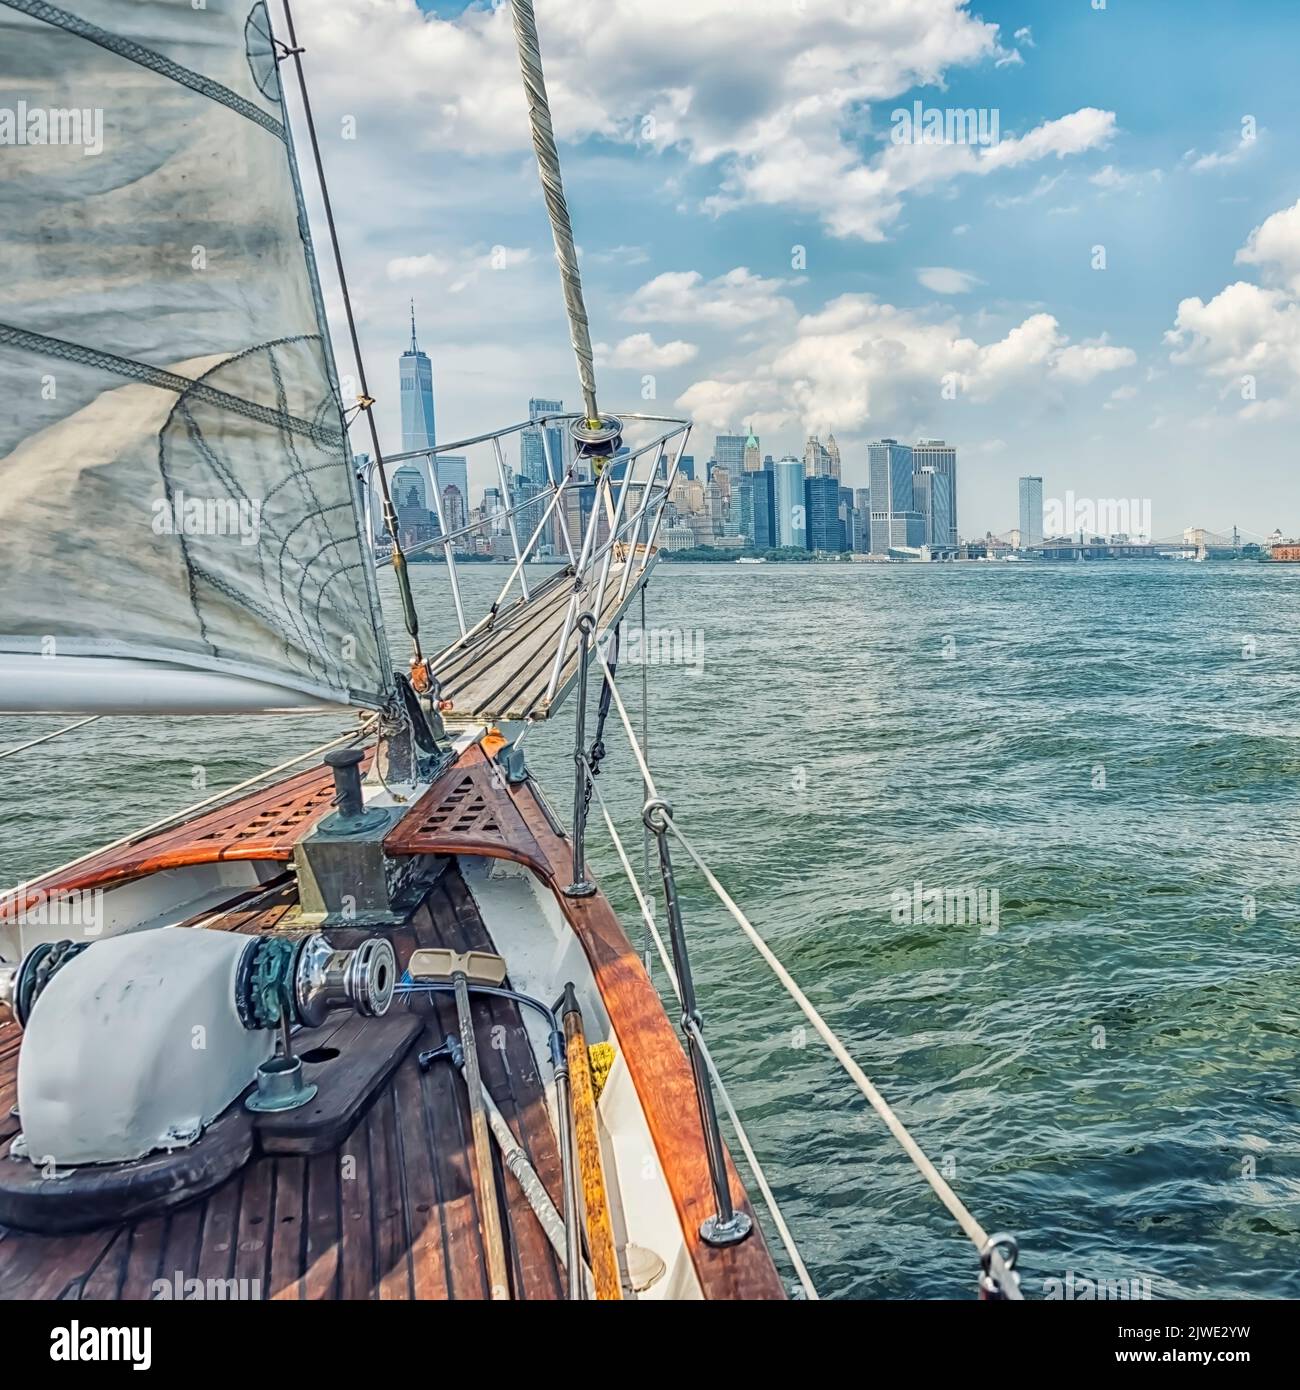 New York City viewed from a sailboat Stock Photo